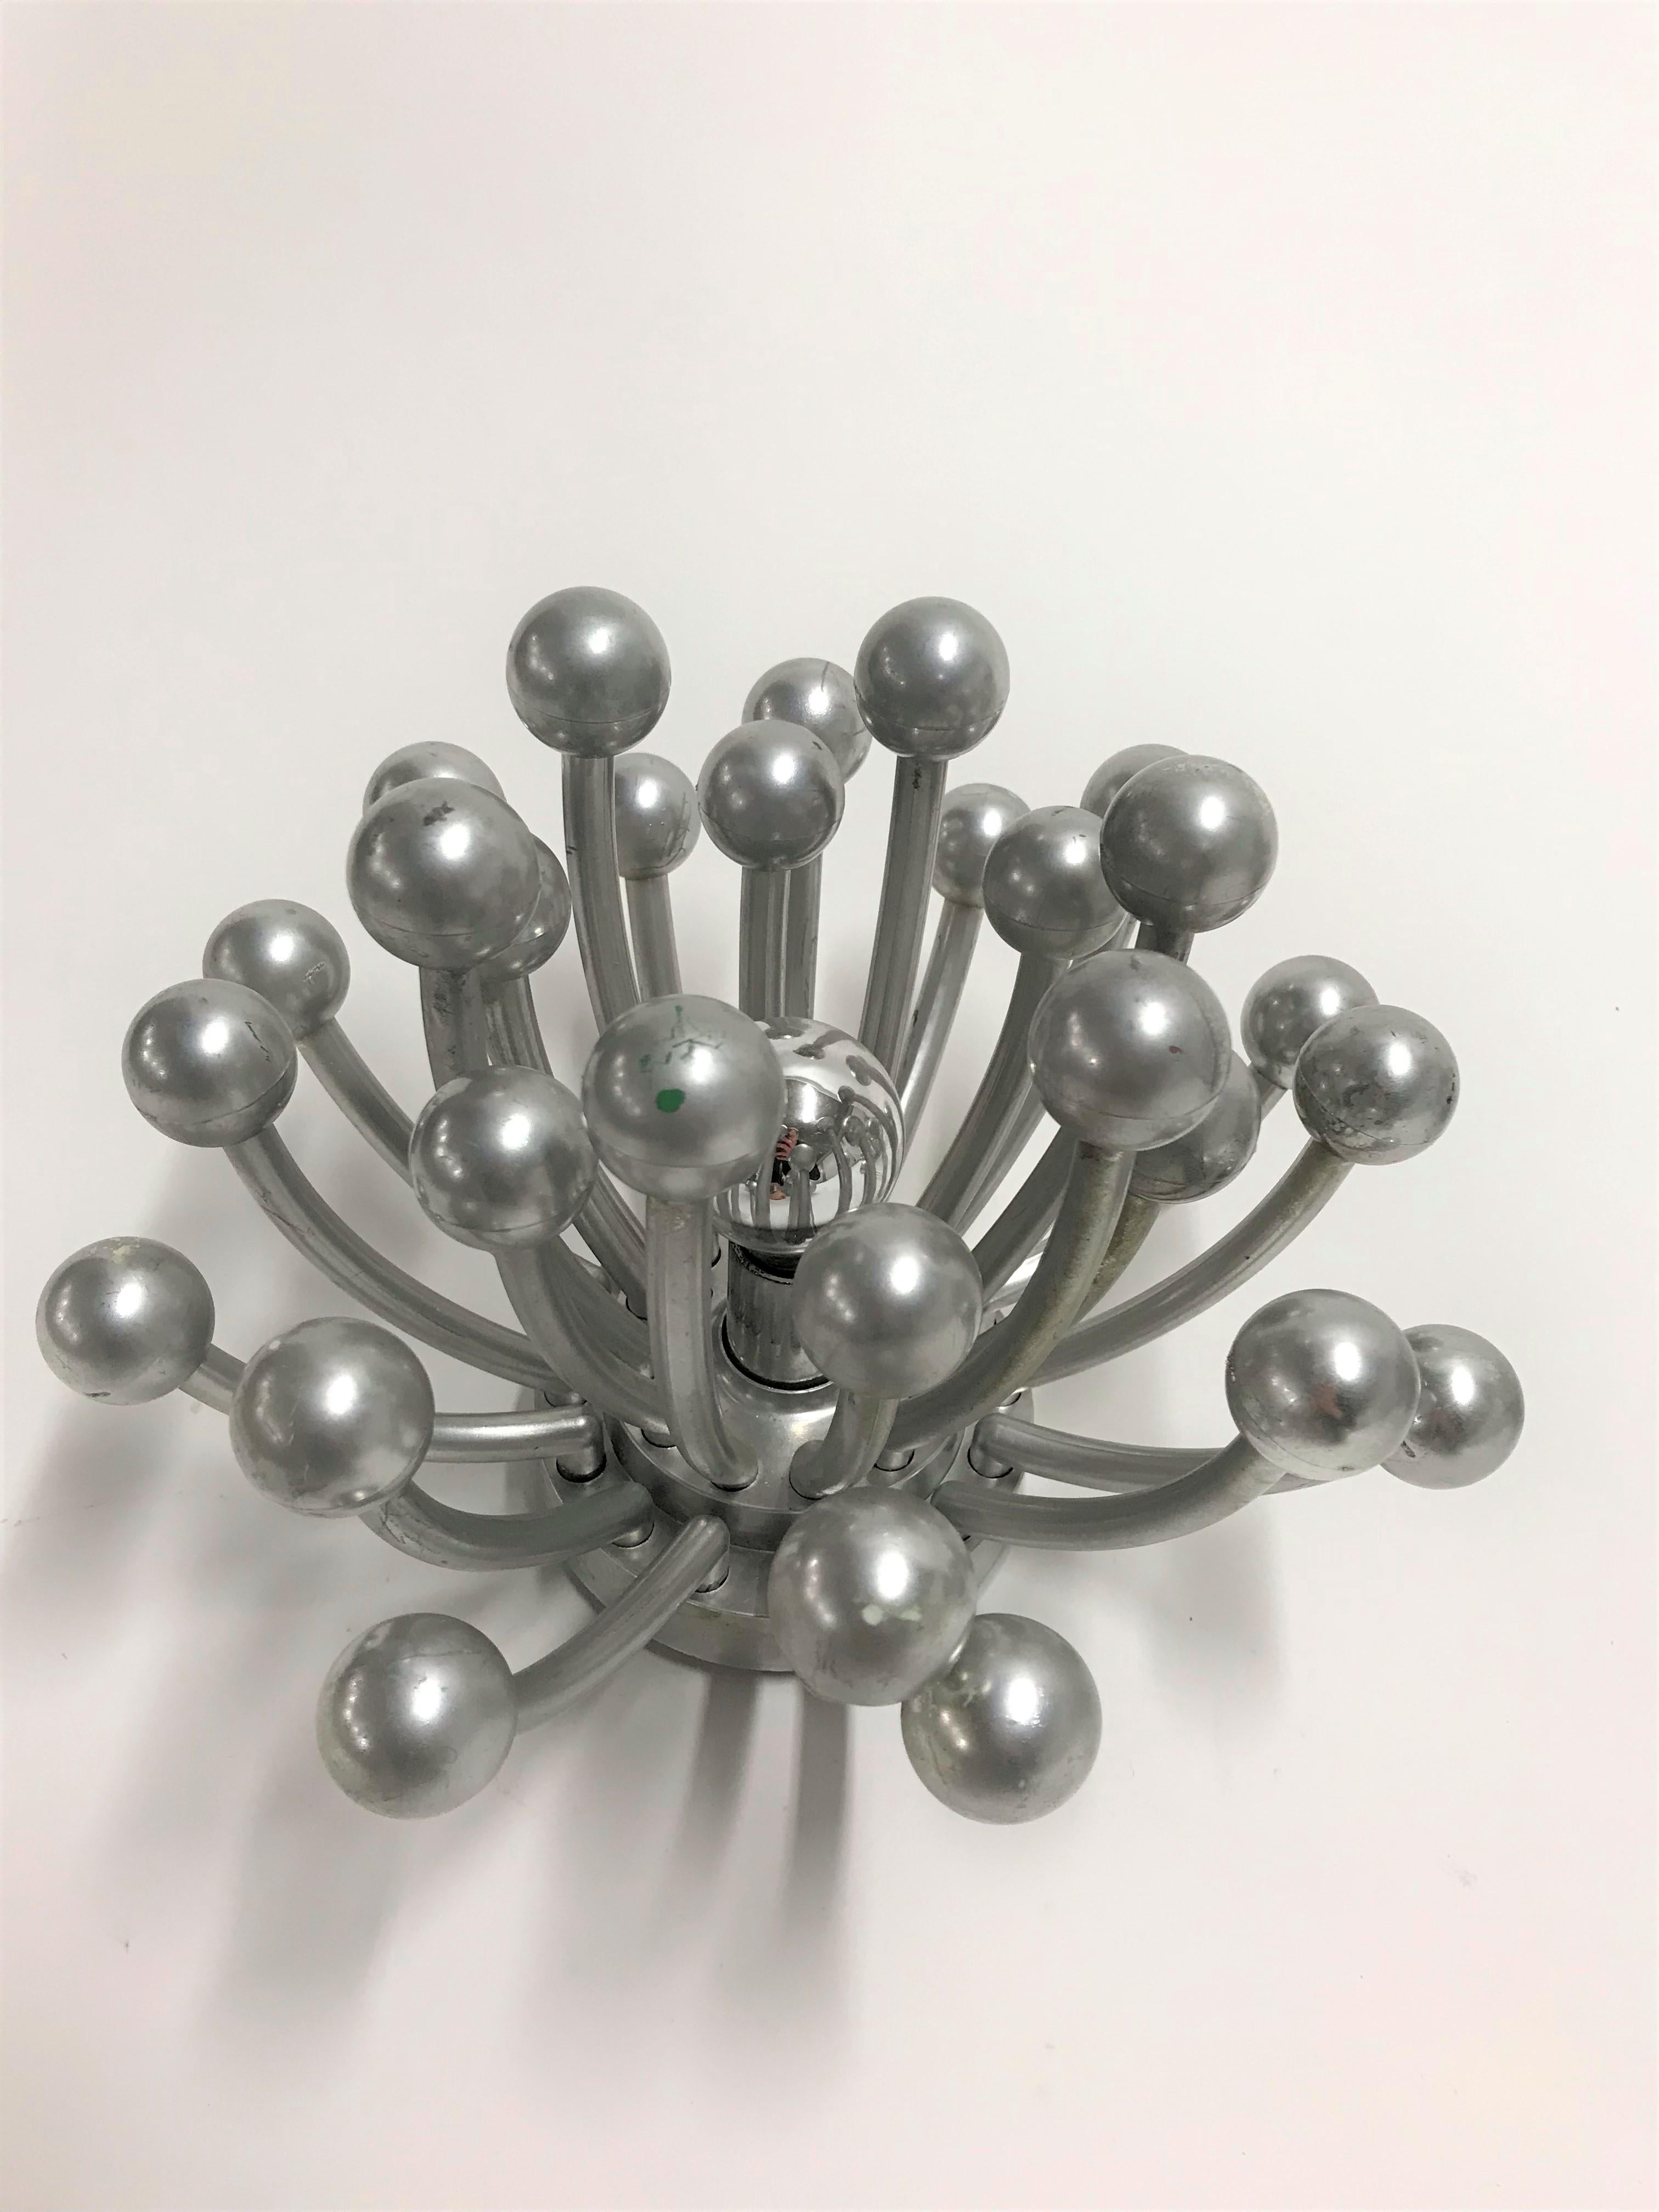 Stunning Pistillo Sputnik wall lamps designed by Studio Tetrach.

These lamps can be used as a table lamp or even as a wall or ceiling light.

It emits a spectacular light.

Good condition, slight patina

1969, Italy

Measures: Diameter